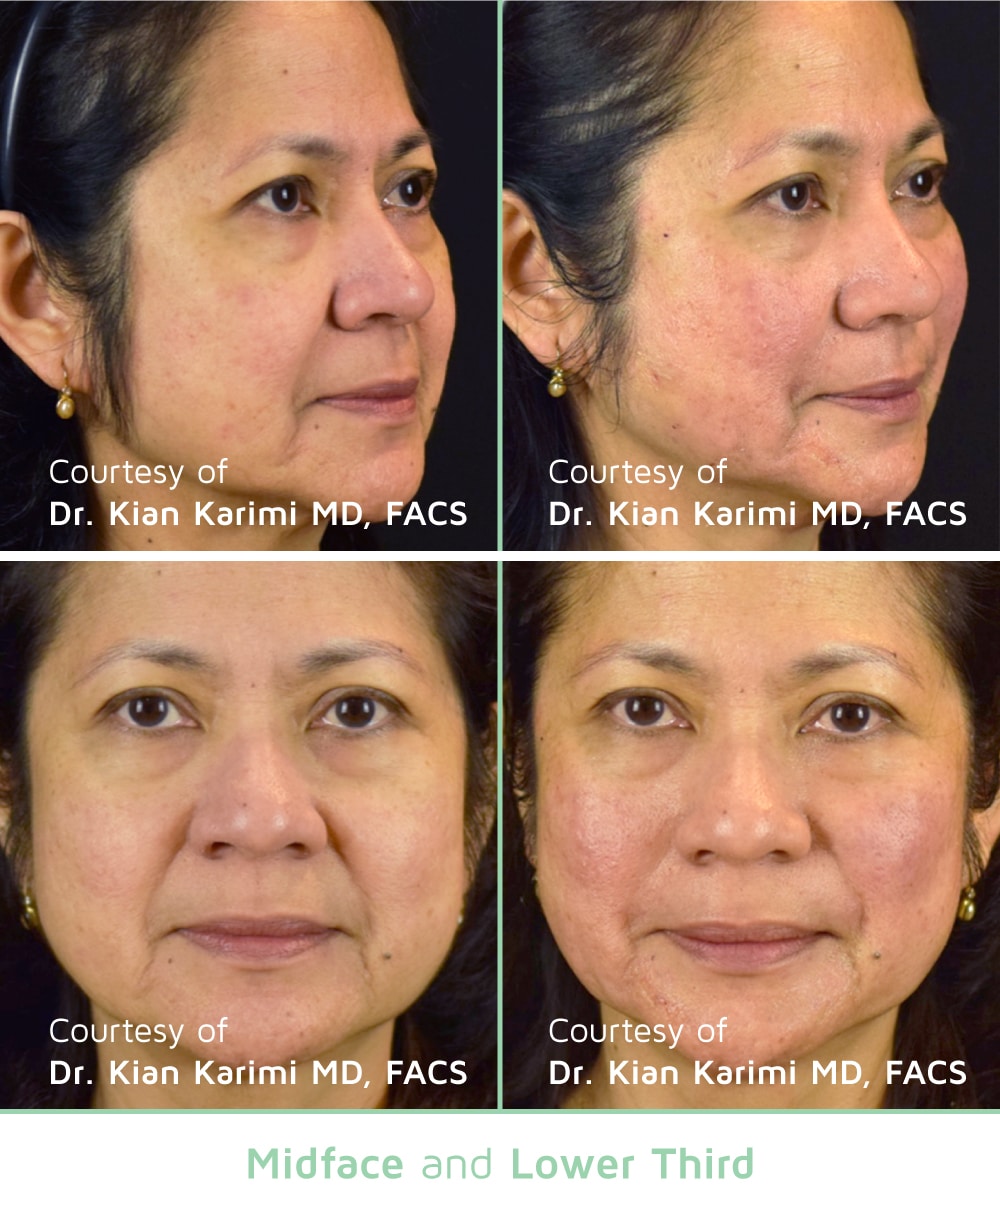 Woman's before and after results from PDO Thread Lift treatment.